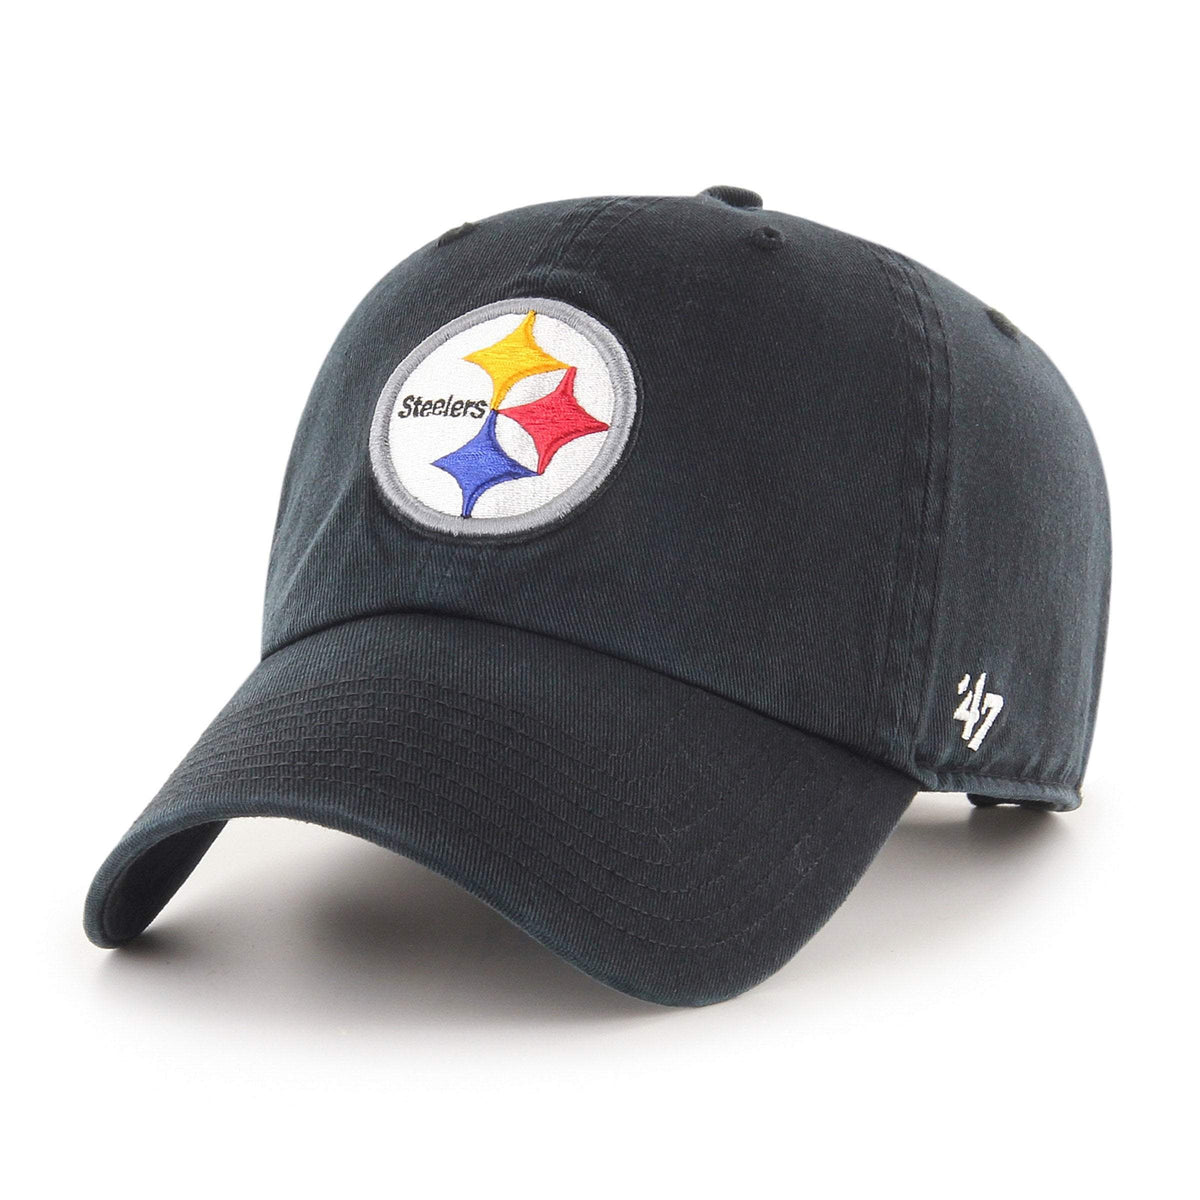 PITTSBURGH STEELERS '47 CLEAN UP